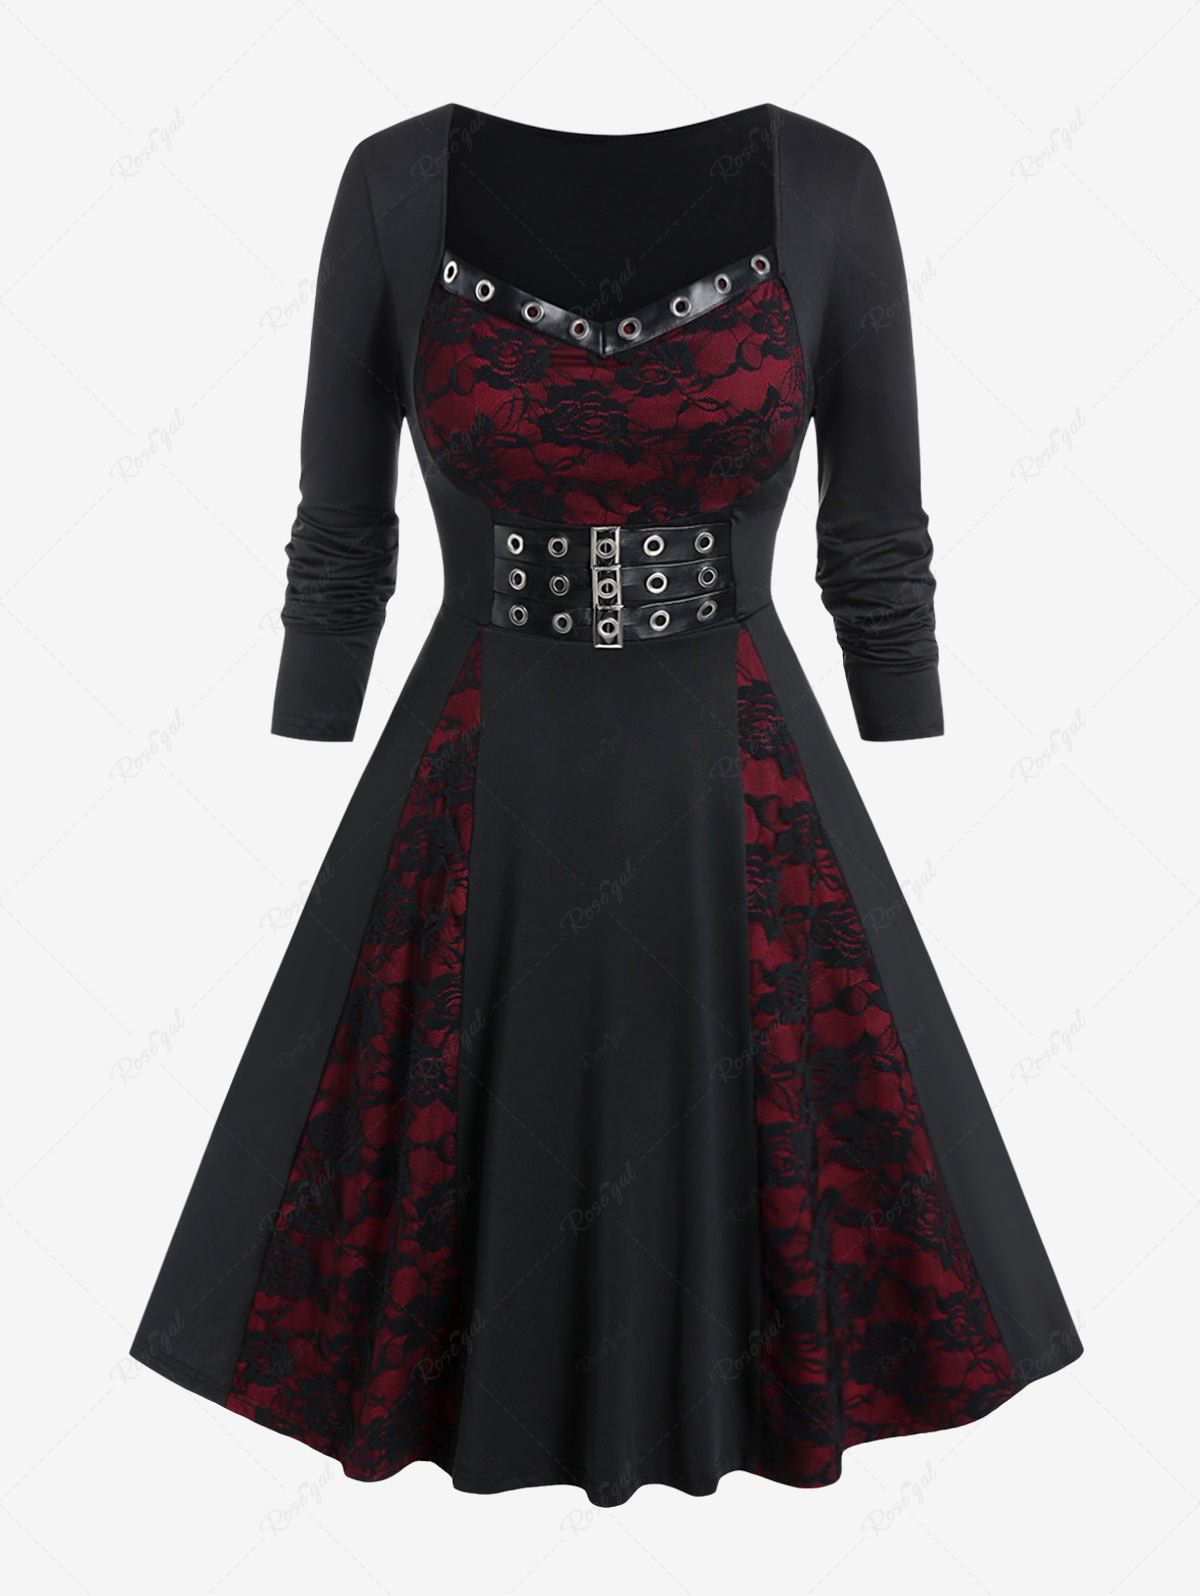 Unique Gothic Lace Panel Grommets Buckled Fit and Flare Dress  